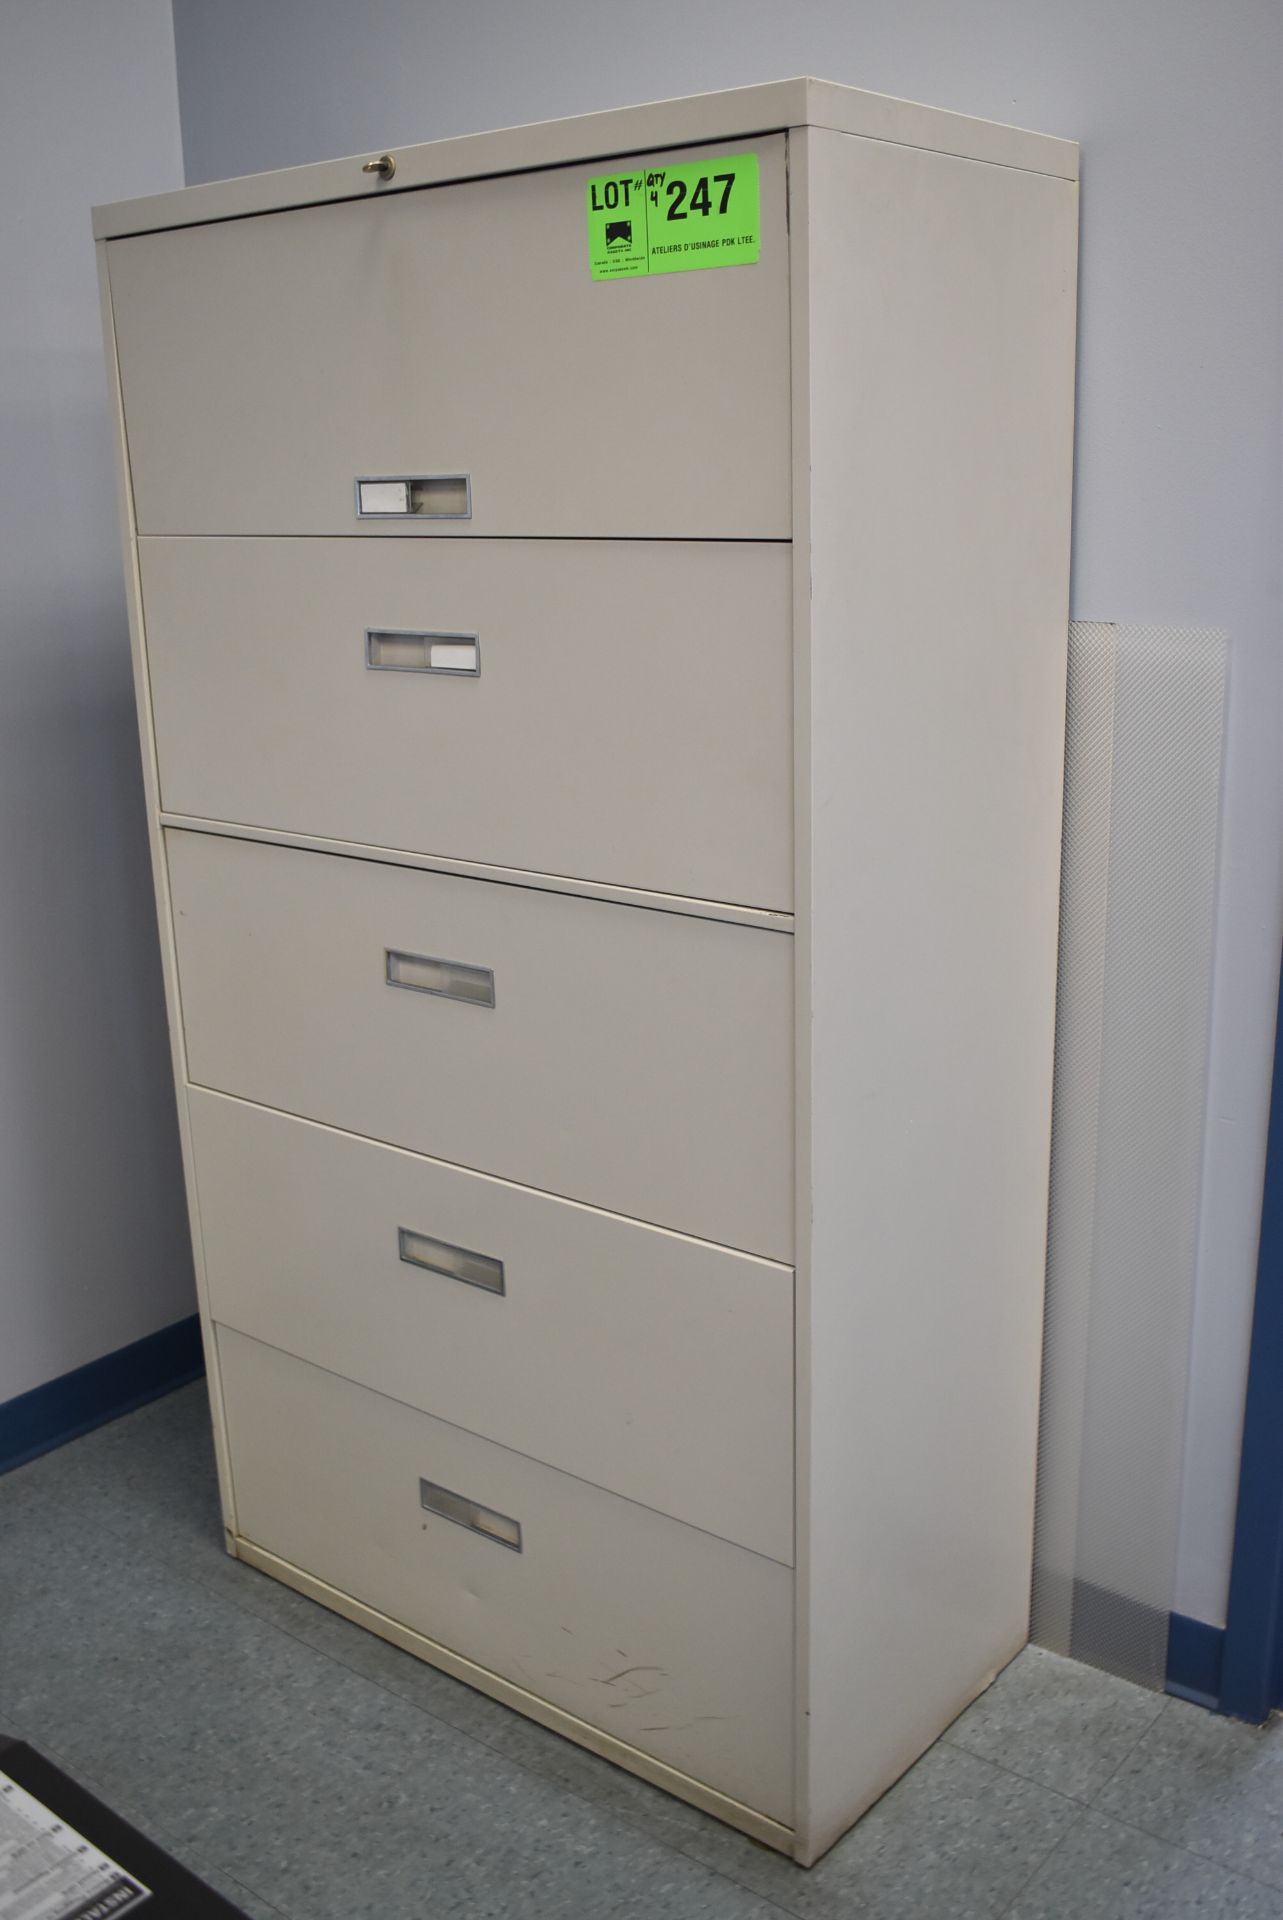 LOT/ (1) 5 DRAWER LATERAL FILE CABINET, (3) 4 DRAWER LATERAL FILE CABINETS